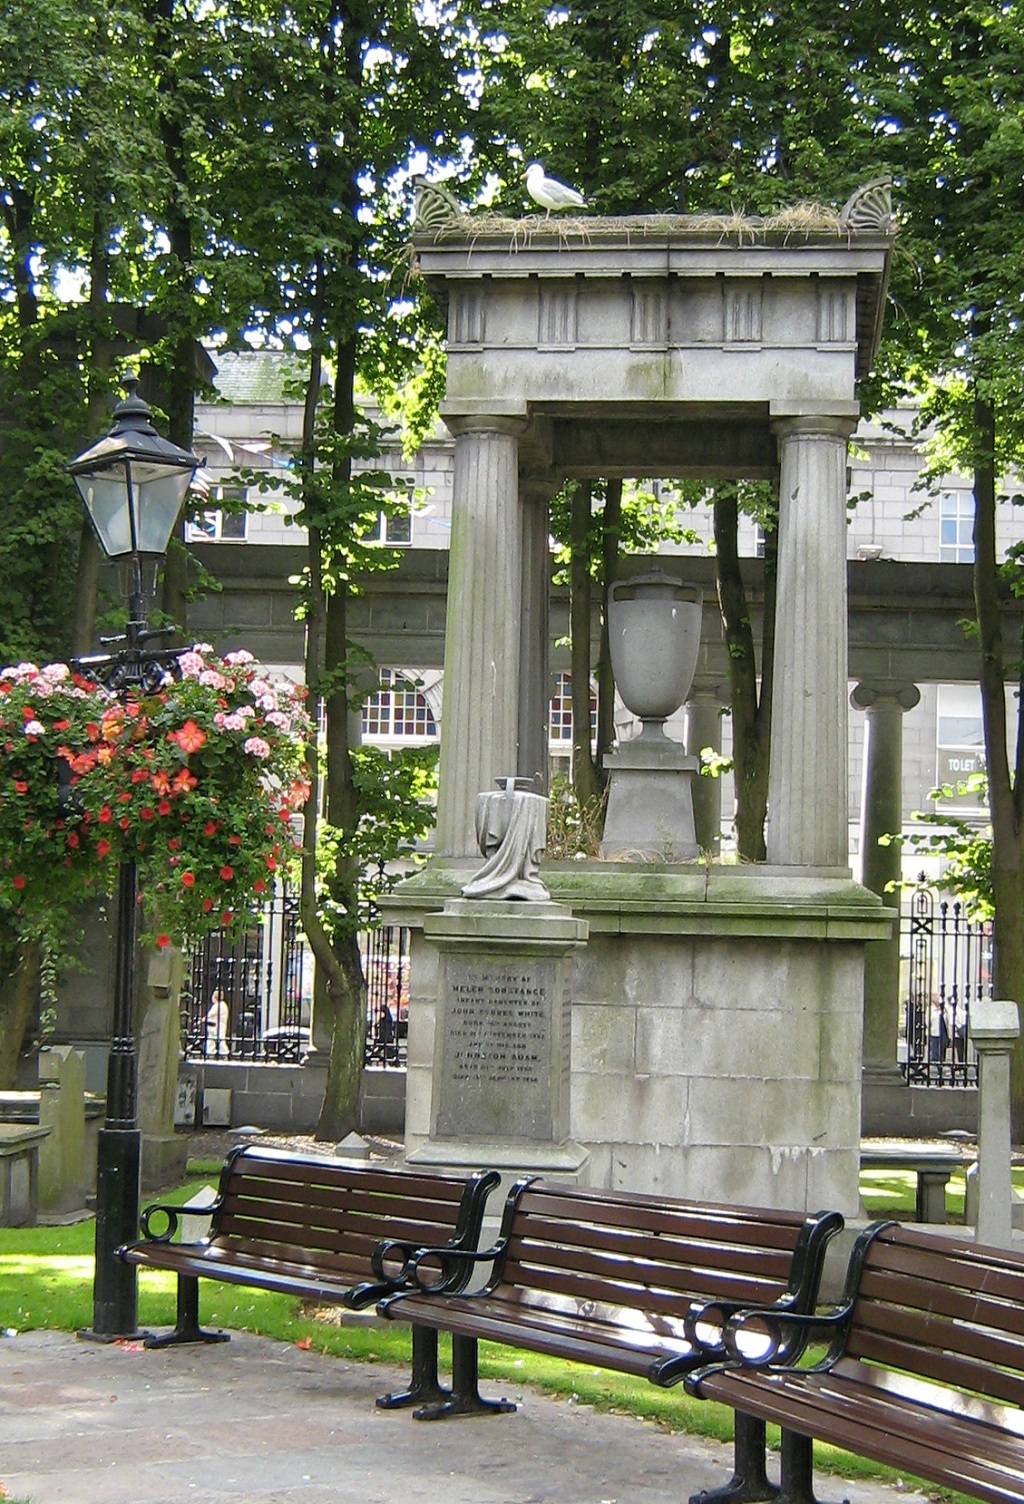 The Hamilton Monument in 2006, with its urn intact